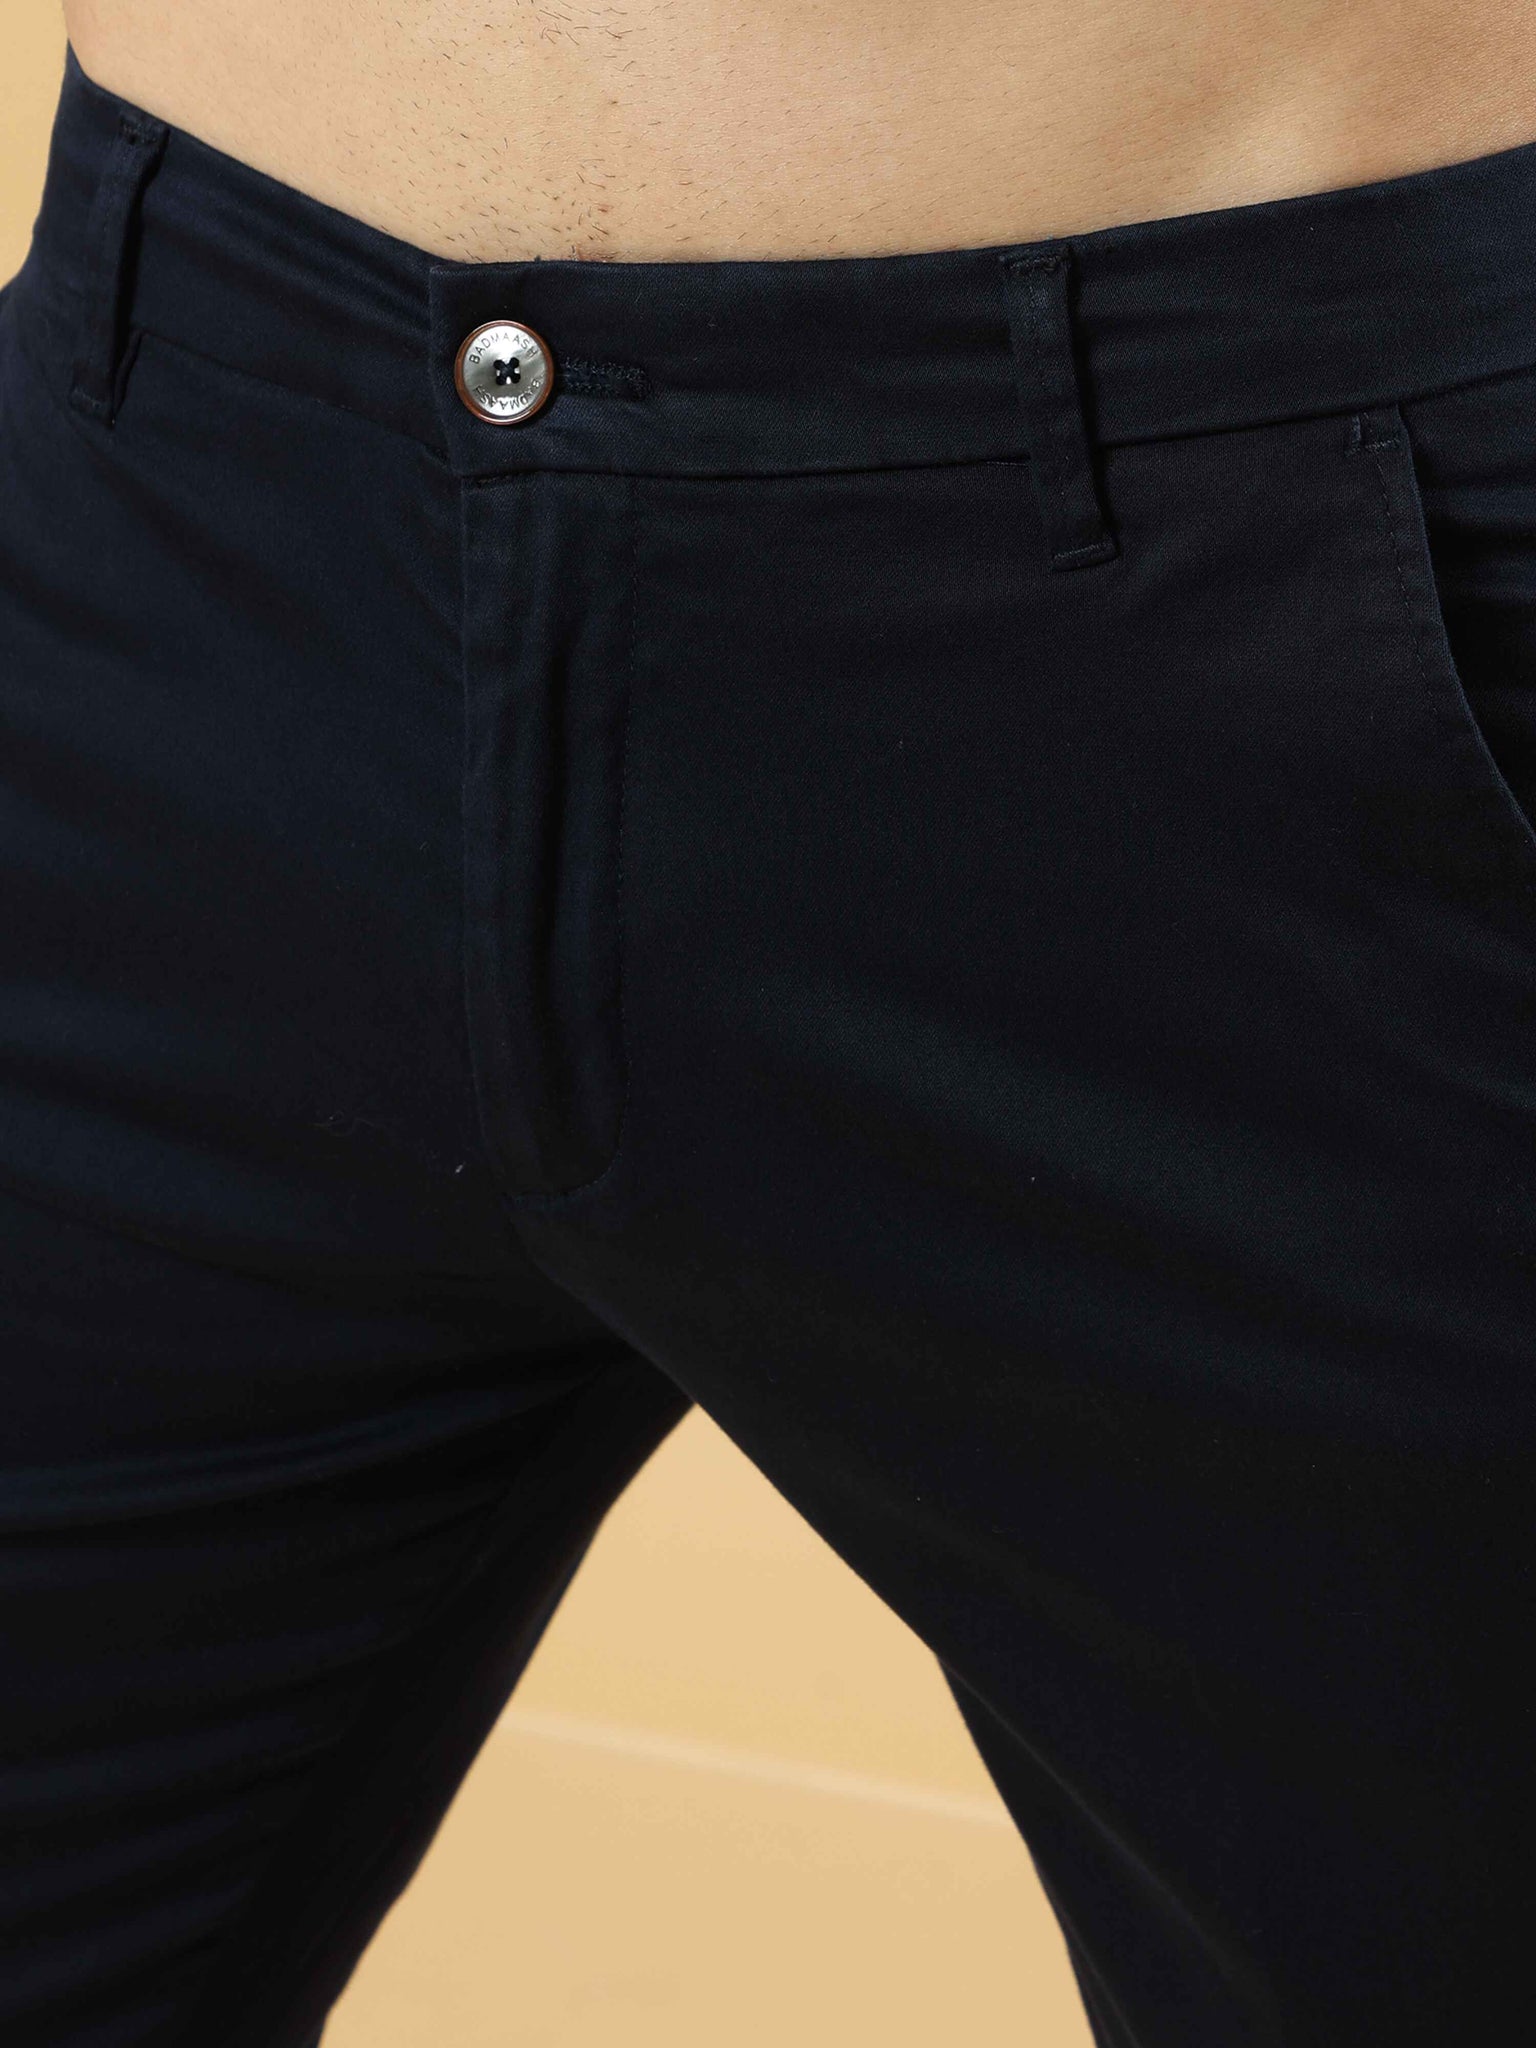 Navy Blue Feather Feel Chinos Trousers